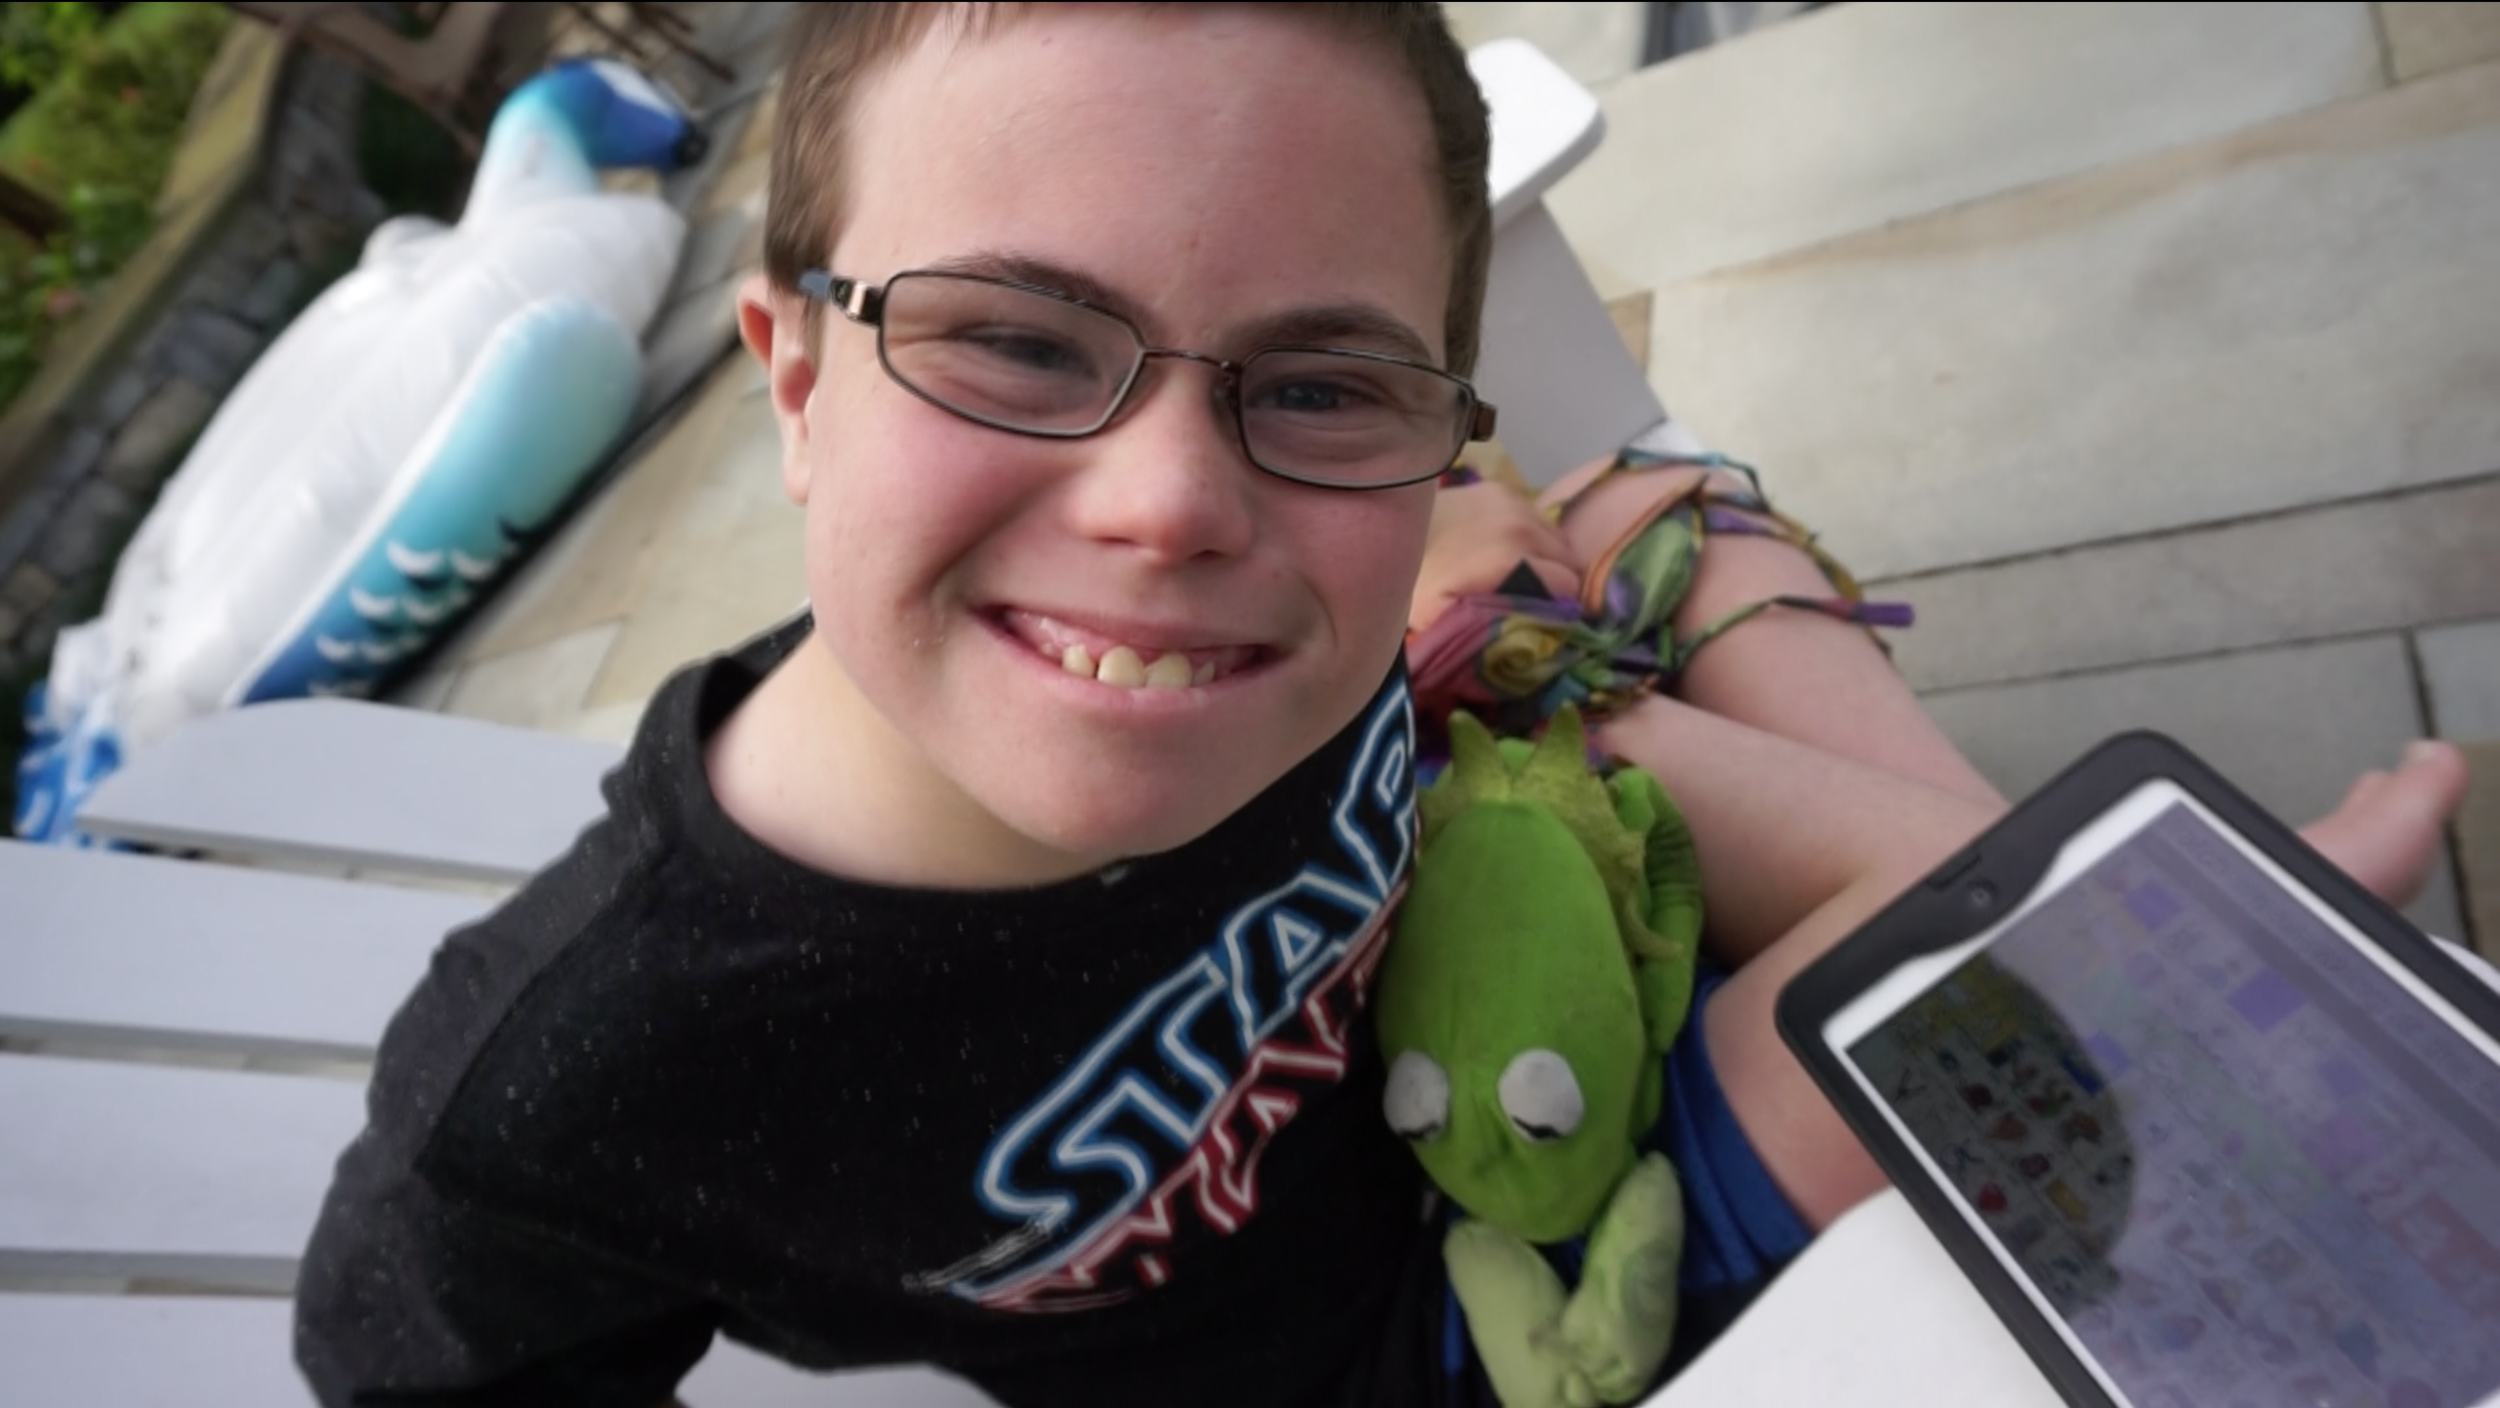   Helping Children Use AAC More Effectively and Efficiently    Donate Now  